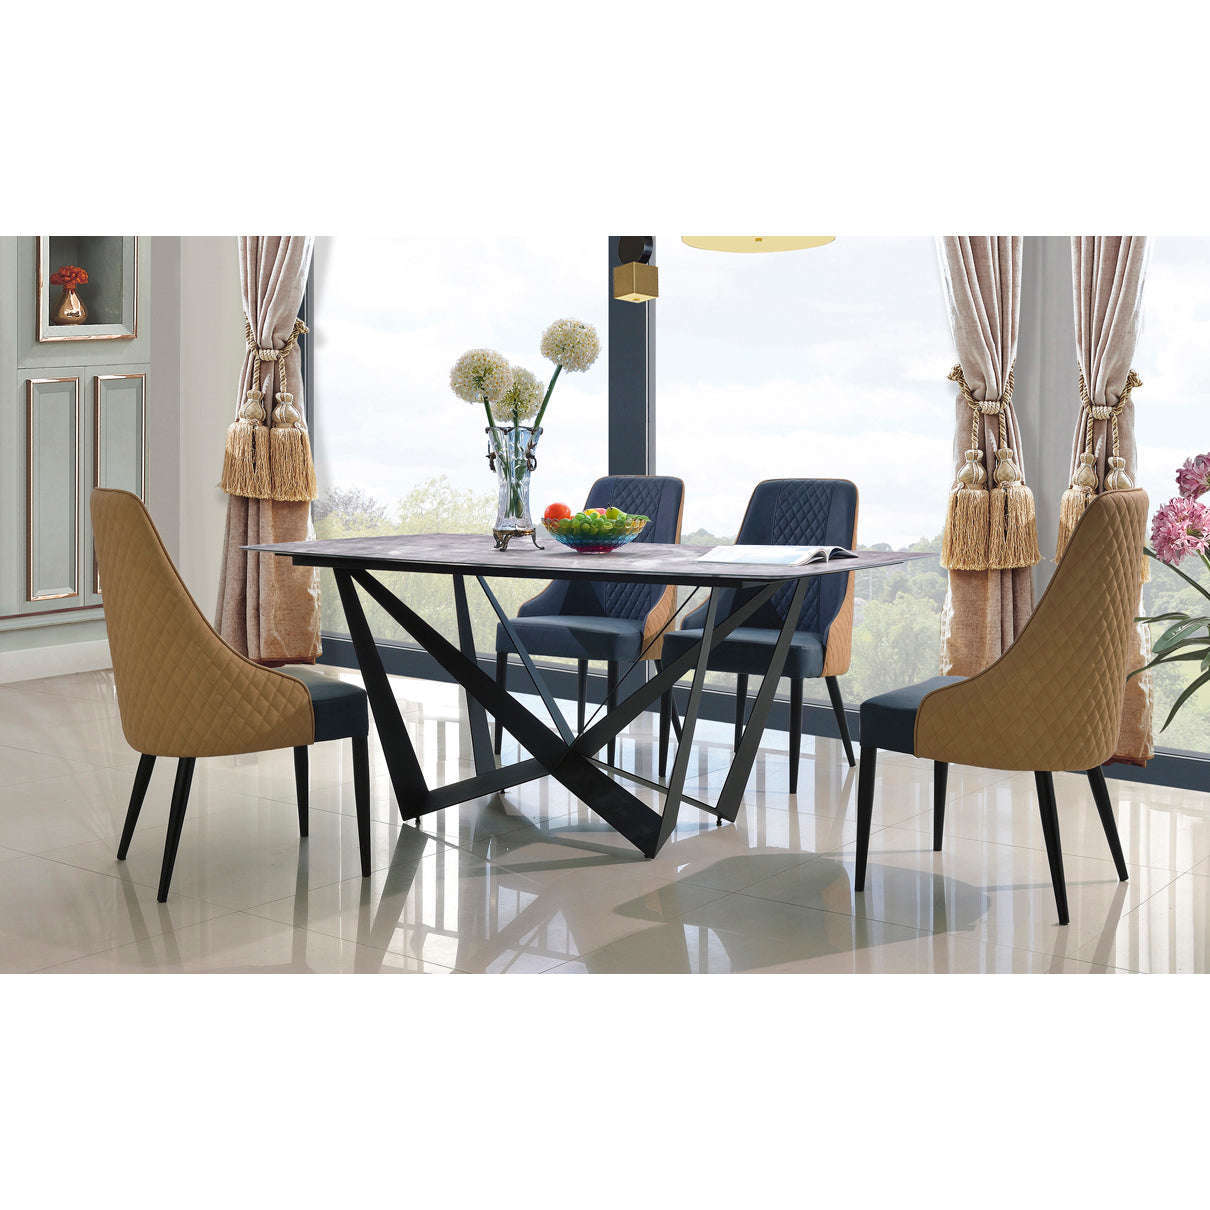 Ashpinoke:Adelaide Polyurethane Dining Chair with Black Metal Legs,Dining Chairs,Heartlands Furniture